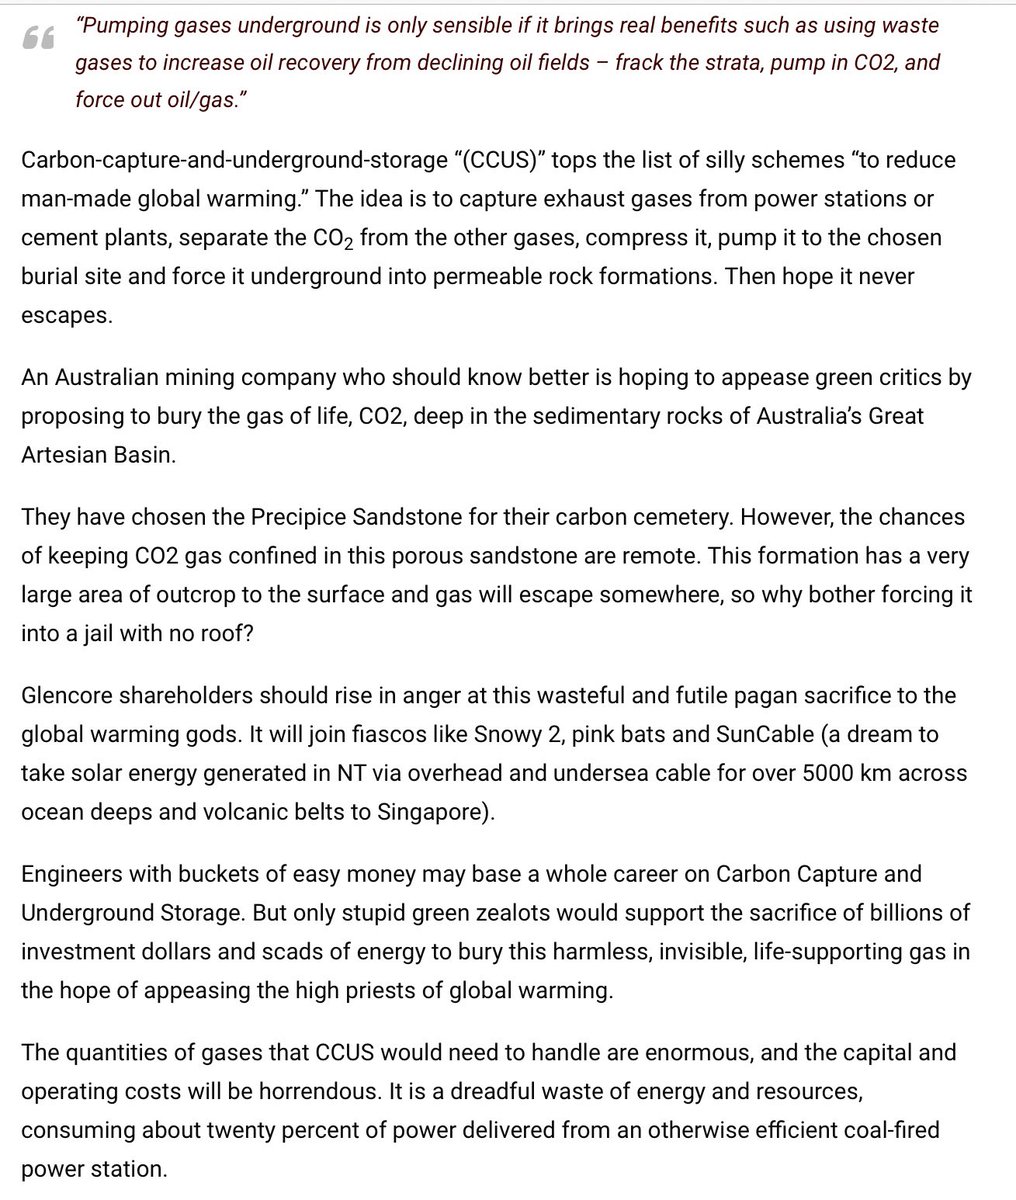 Carbon capture.
Yet another green energy scam.
Artificially raising the cost of fossil fuels.
#renewables #CostofNetZero #ClimateBrawl #ClimateScam 

wattsupwiththat.com/2024/05/17/the…